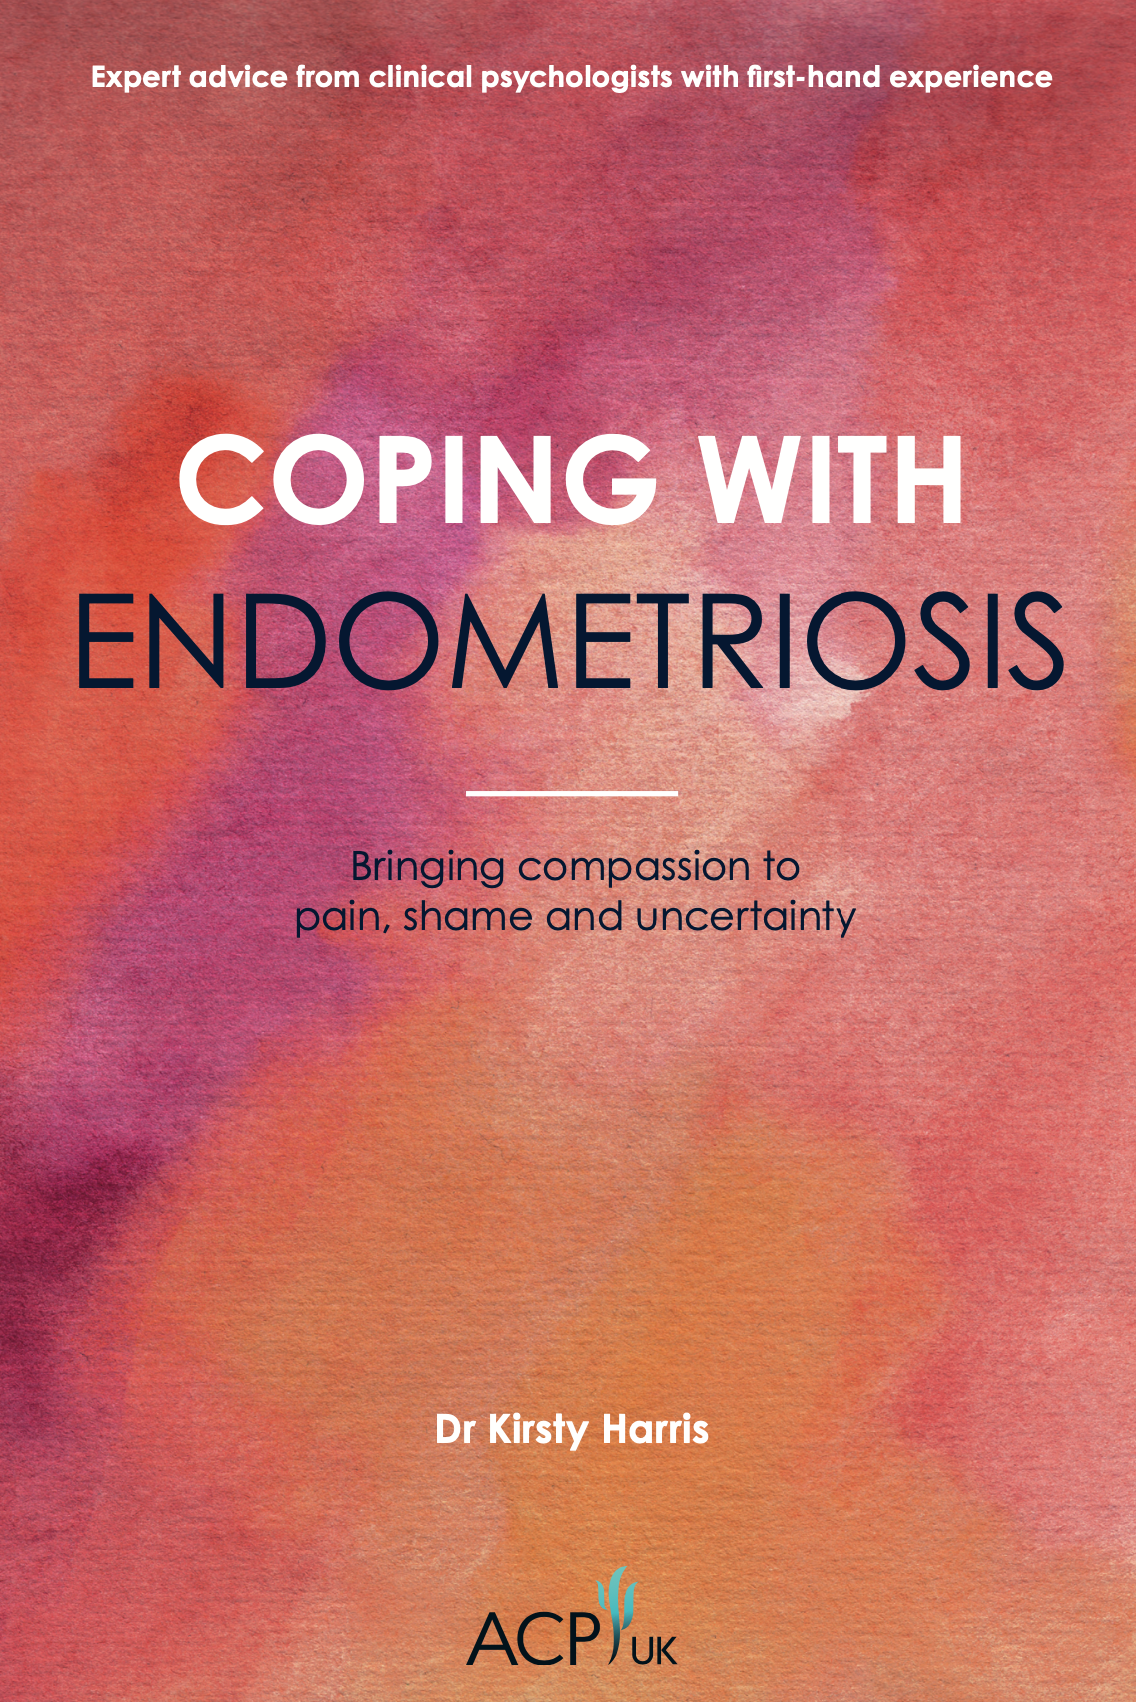 Coping With Endometriosis: Bringing Compassion to Pain, Shame & Uncertainty